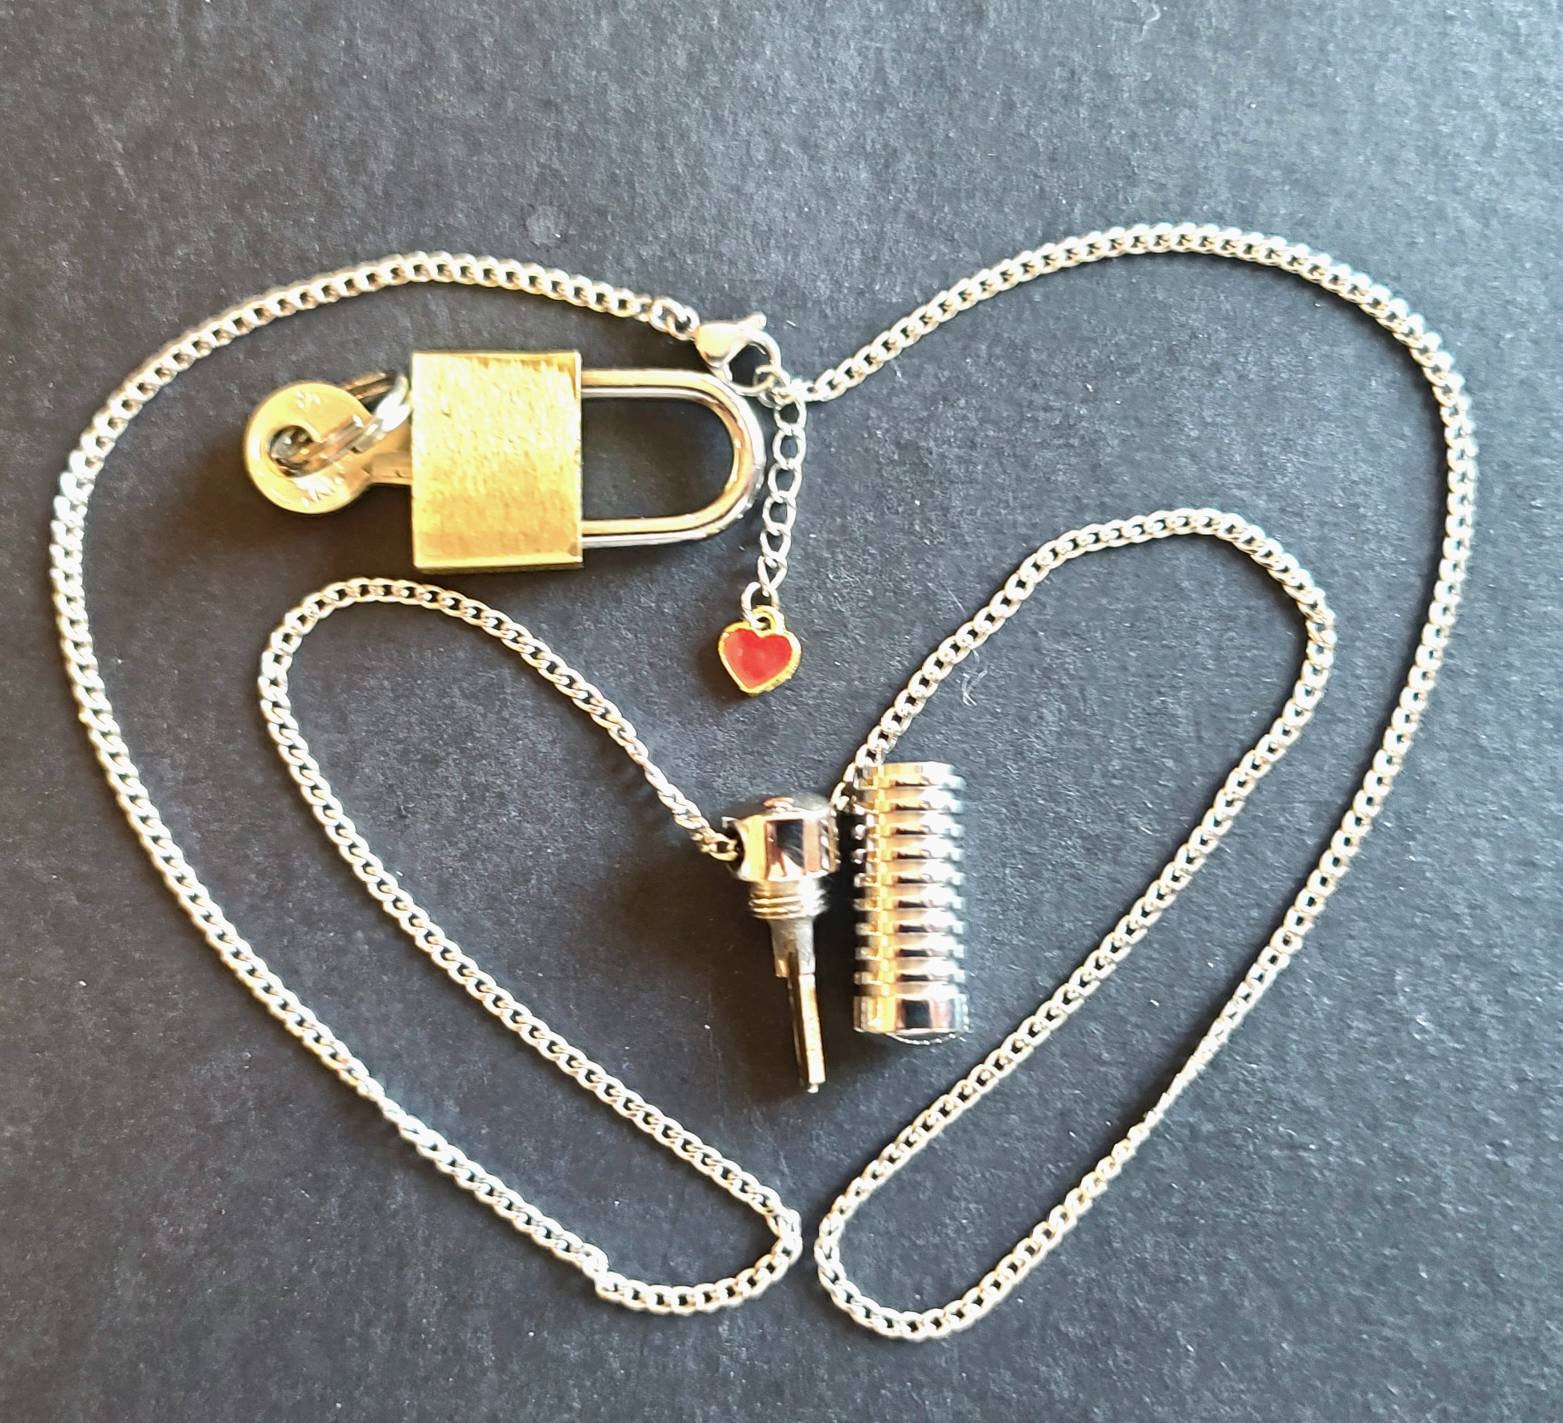 N055/kn the Knurled Secret Chastity Key Necklace This is a